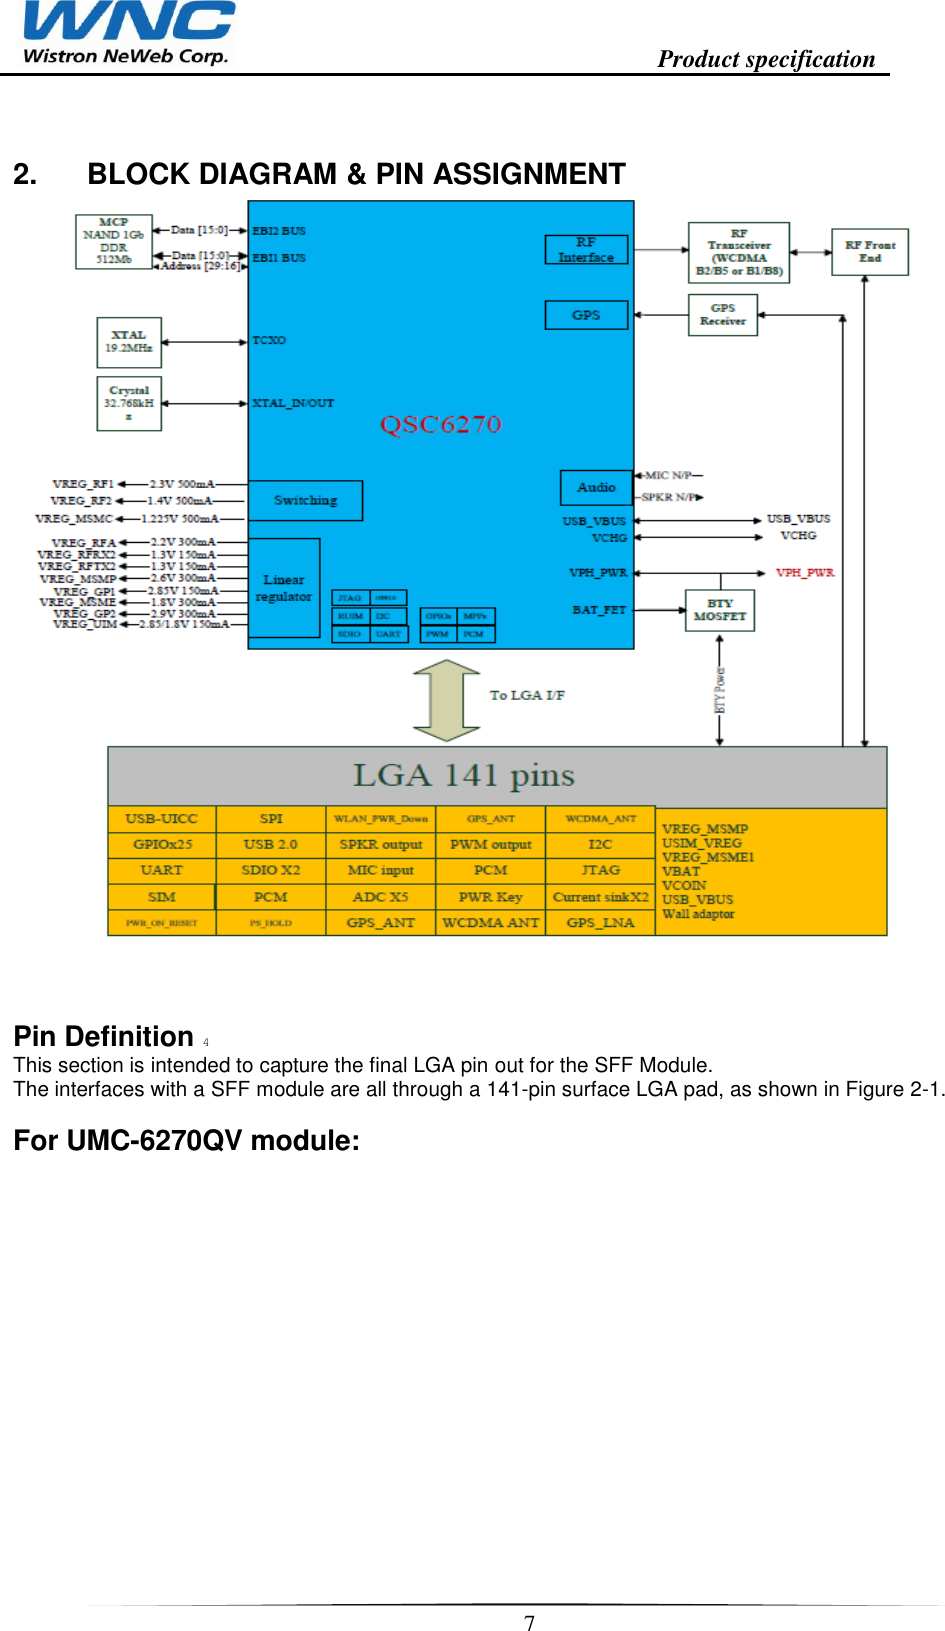                                                                    Product specification    7  2.  BLOCK DIAGRAM &amp; PIN ASSIGNMENT   Pin Definition 4 This section is intended to capture the final LGA pin out for the SFF Module. The interfaces with a SFF module are all through a 141-pin surface LGA pad, as shown in Figure 2-1.   For UMC-6270QV module:  